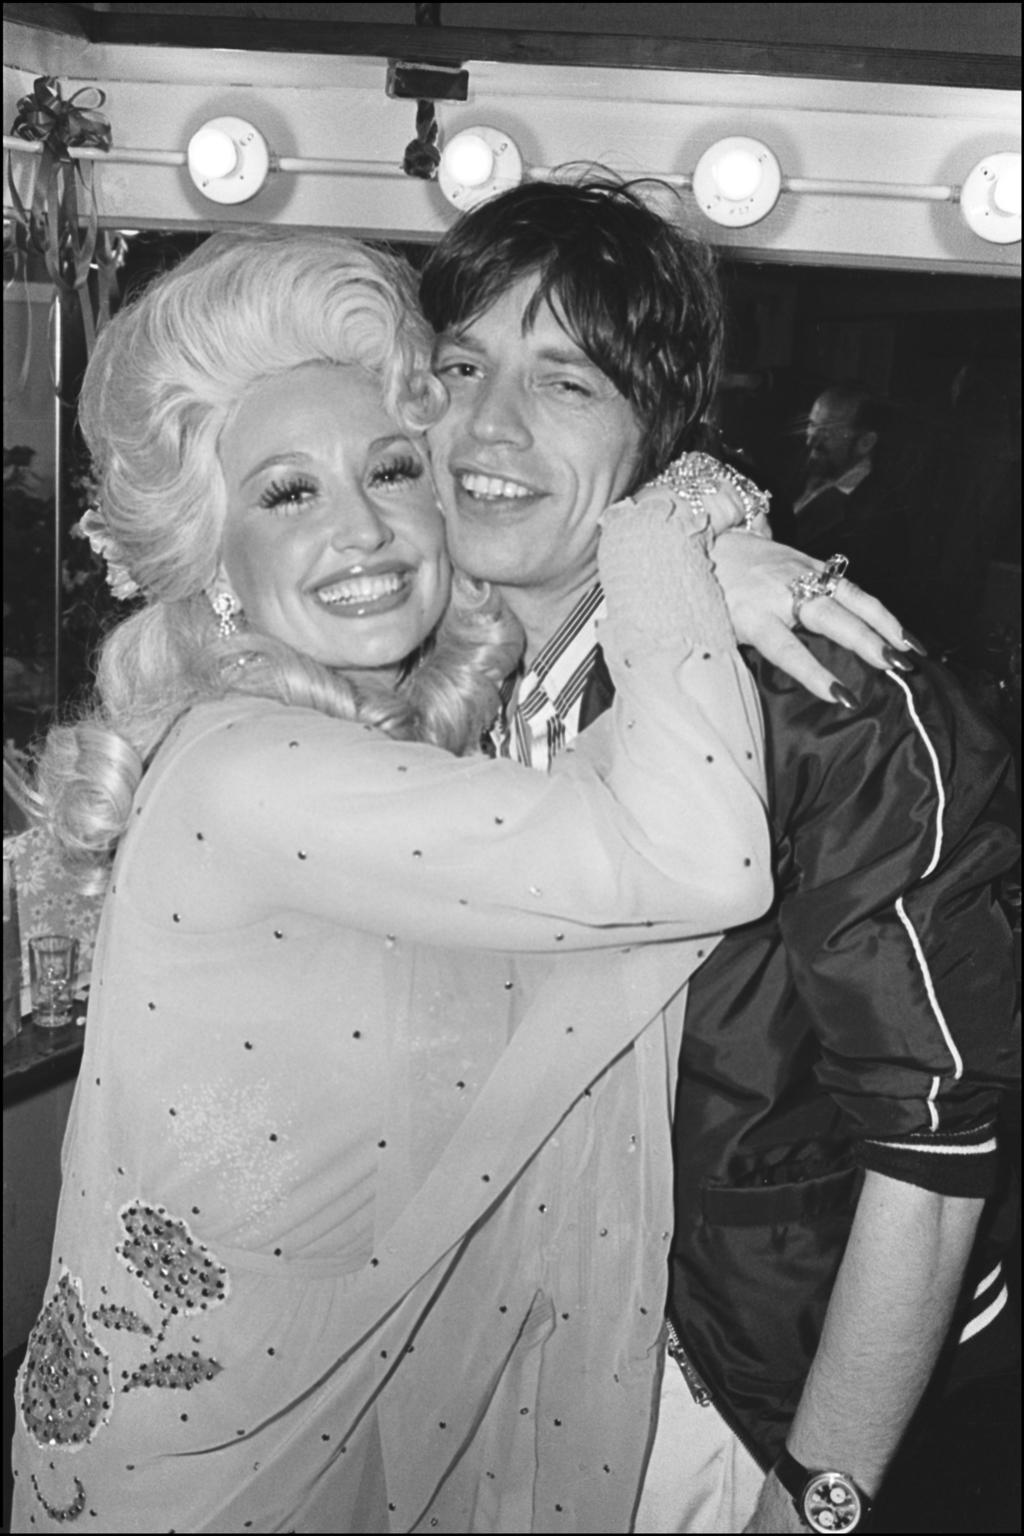 Allan Tannenbaum Black and White Photograph - Dolly Parton and Mick Jagger hugging